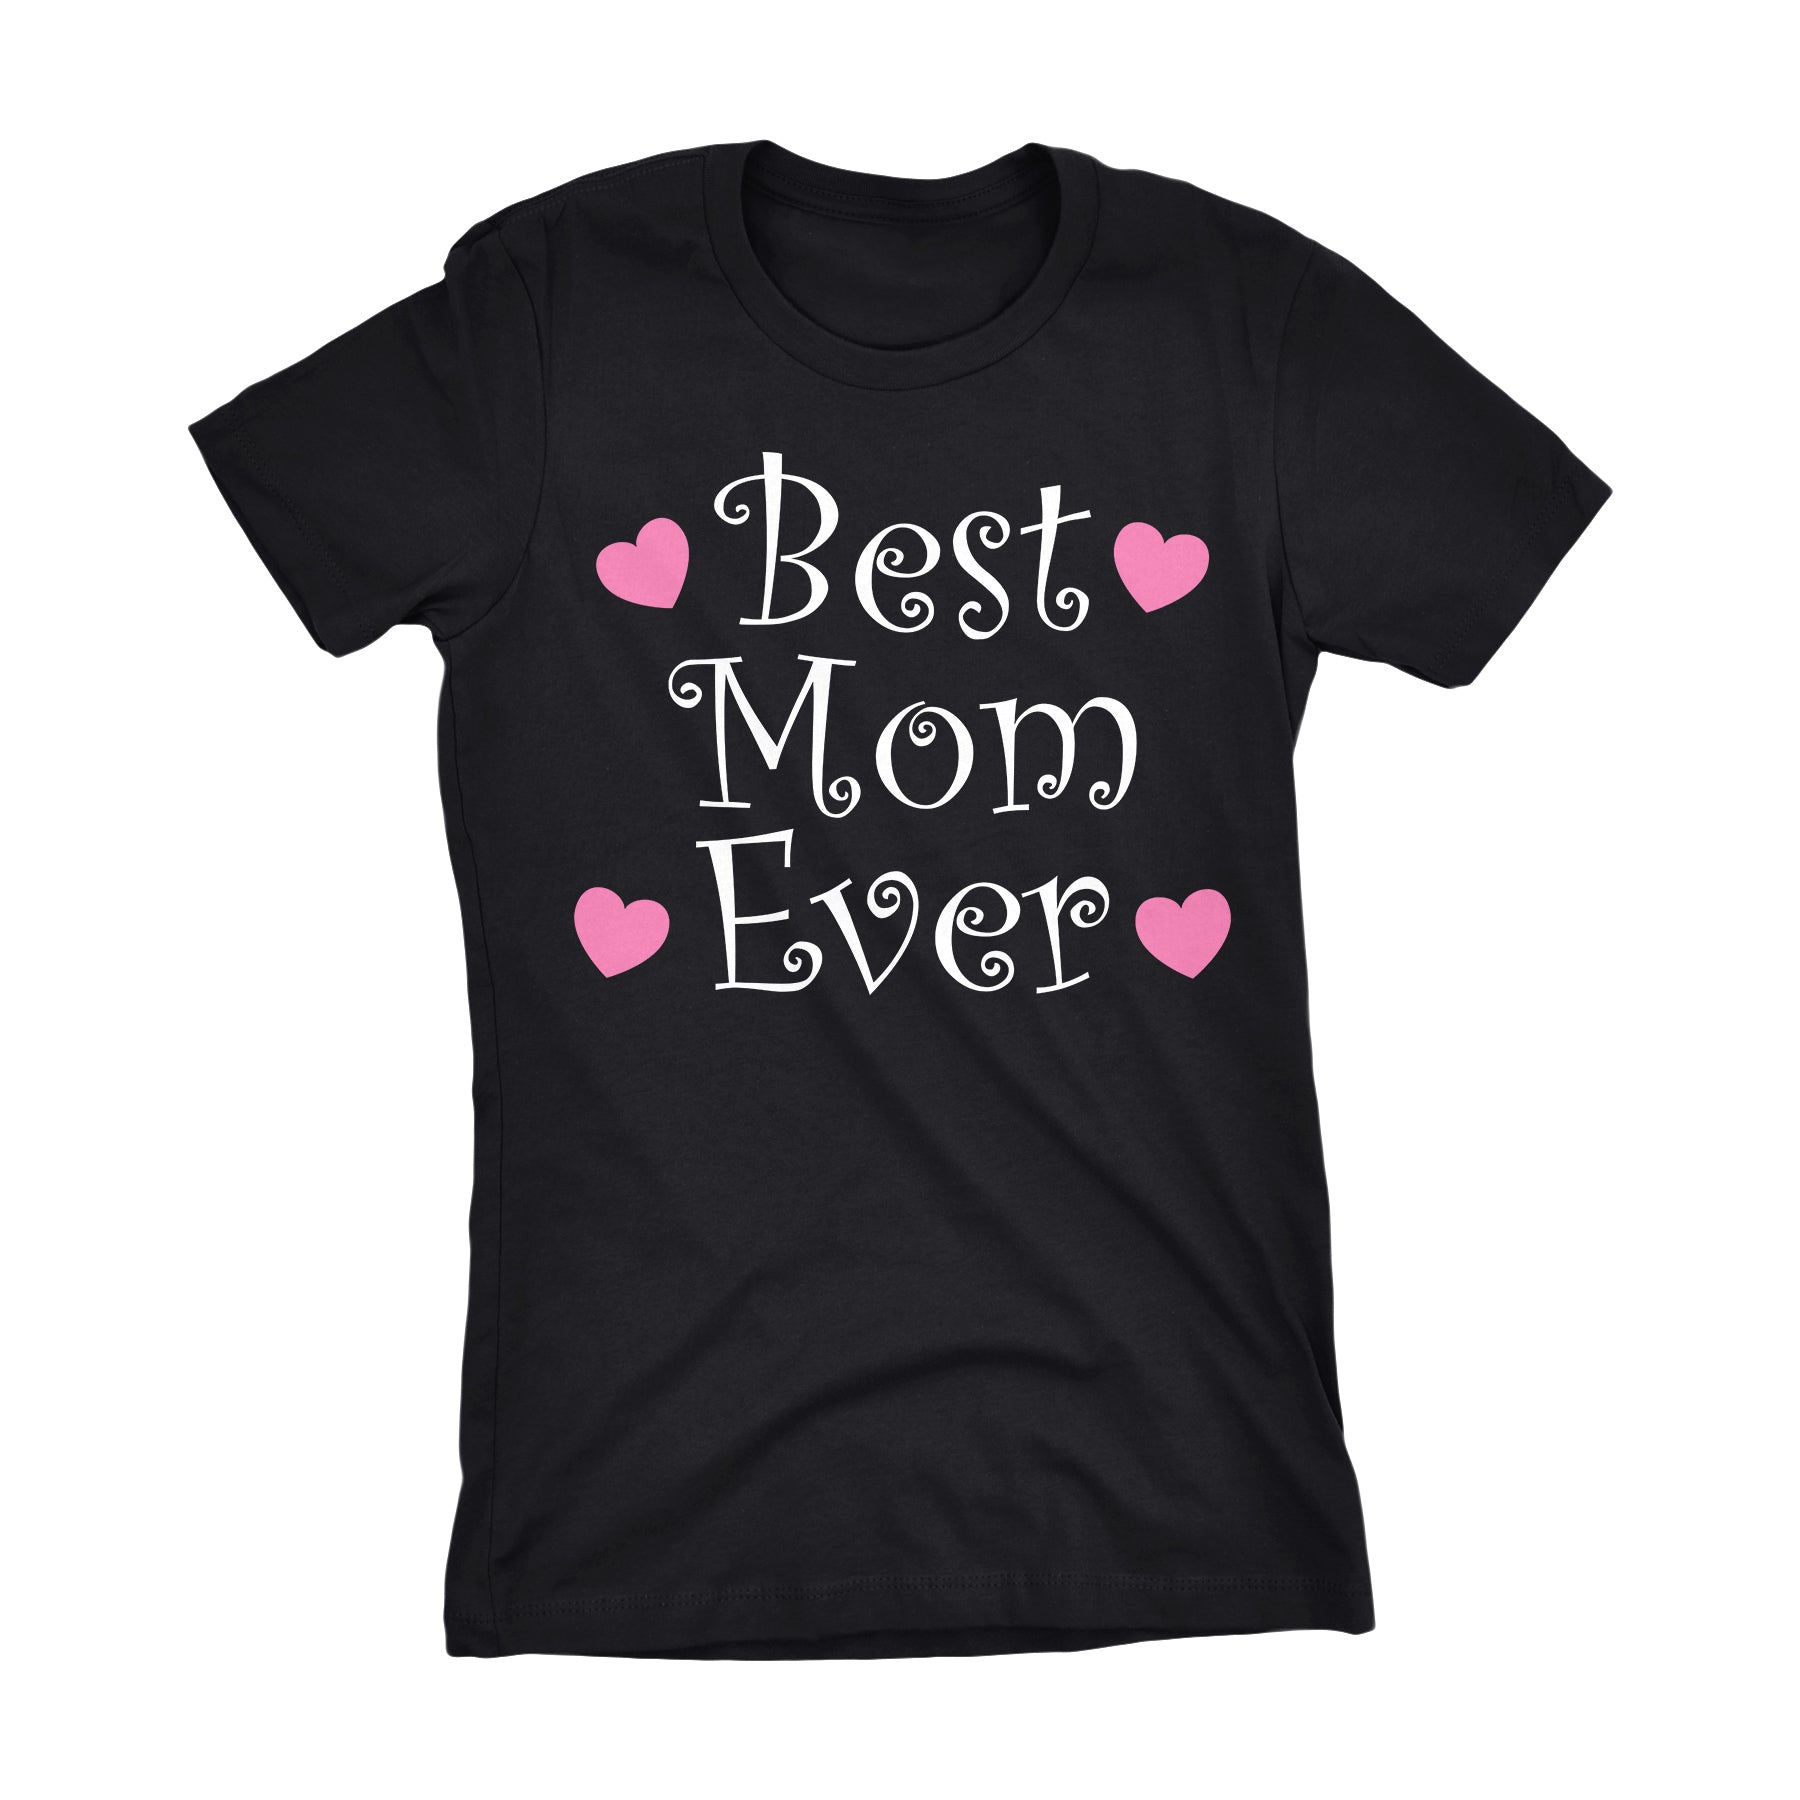 Best MOM Ever - Hearts 002LDS - Mother's Day Gift Mom Ladies Fit T-shirt